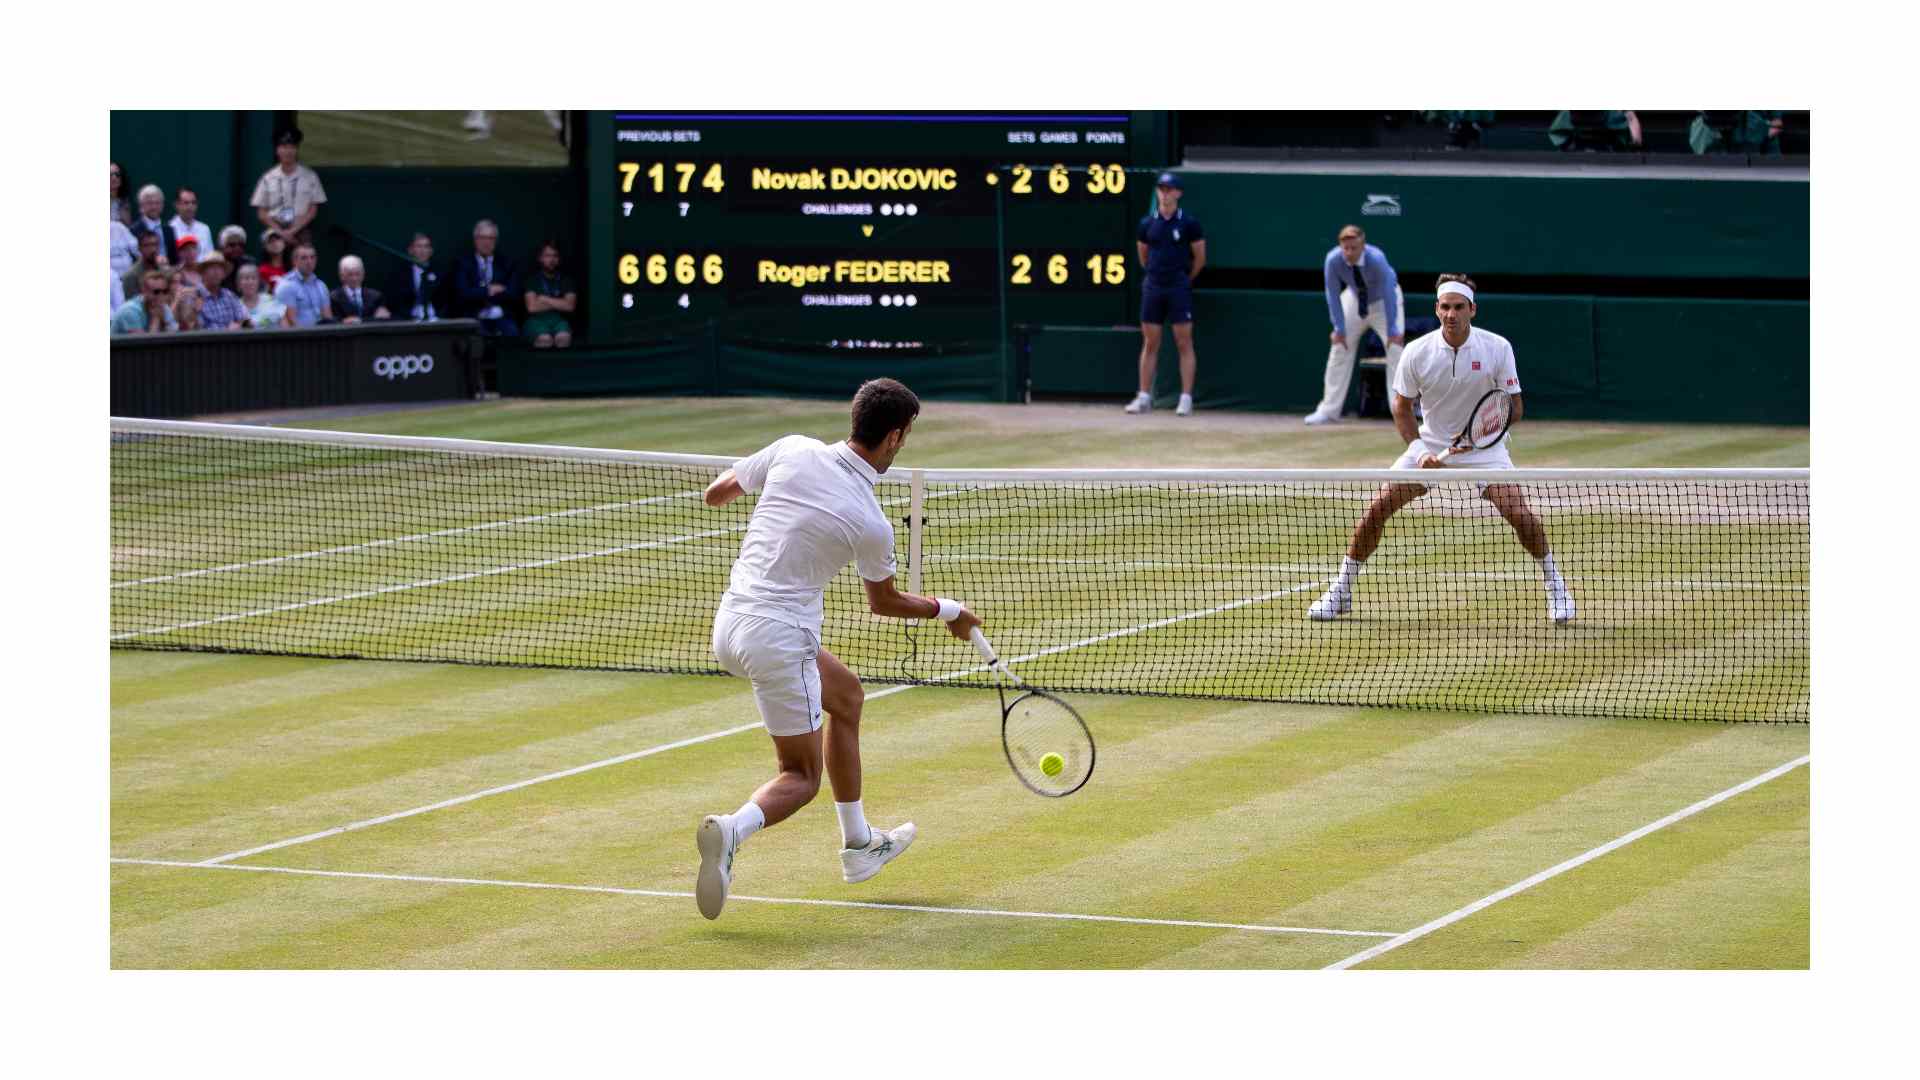 Novak Djokovic and Roger Federer in a file photo; Credit: Wimbledon Twitter page